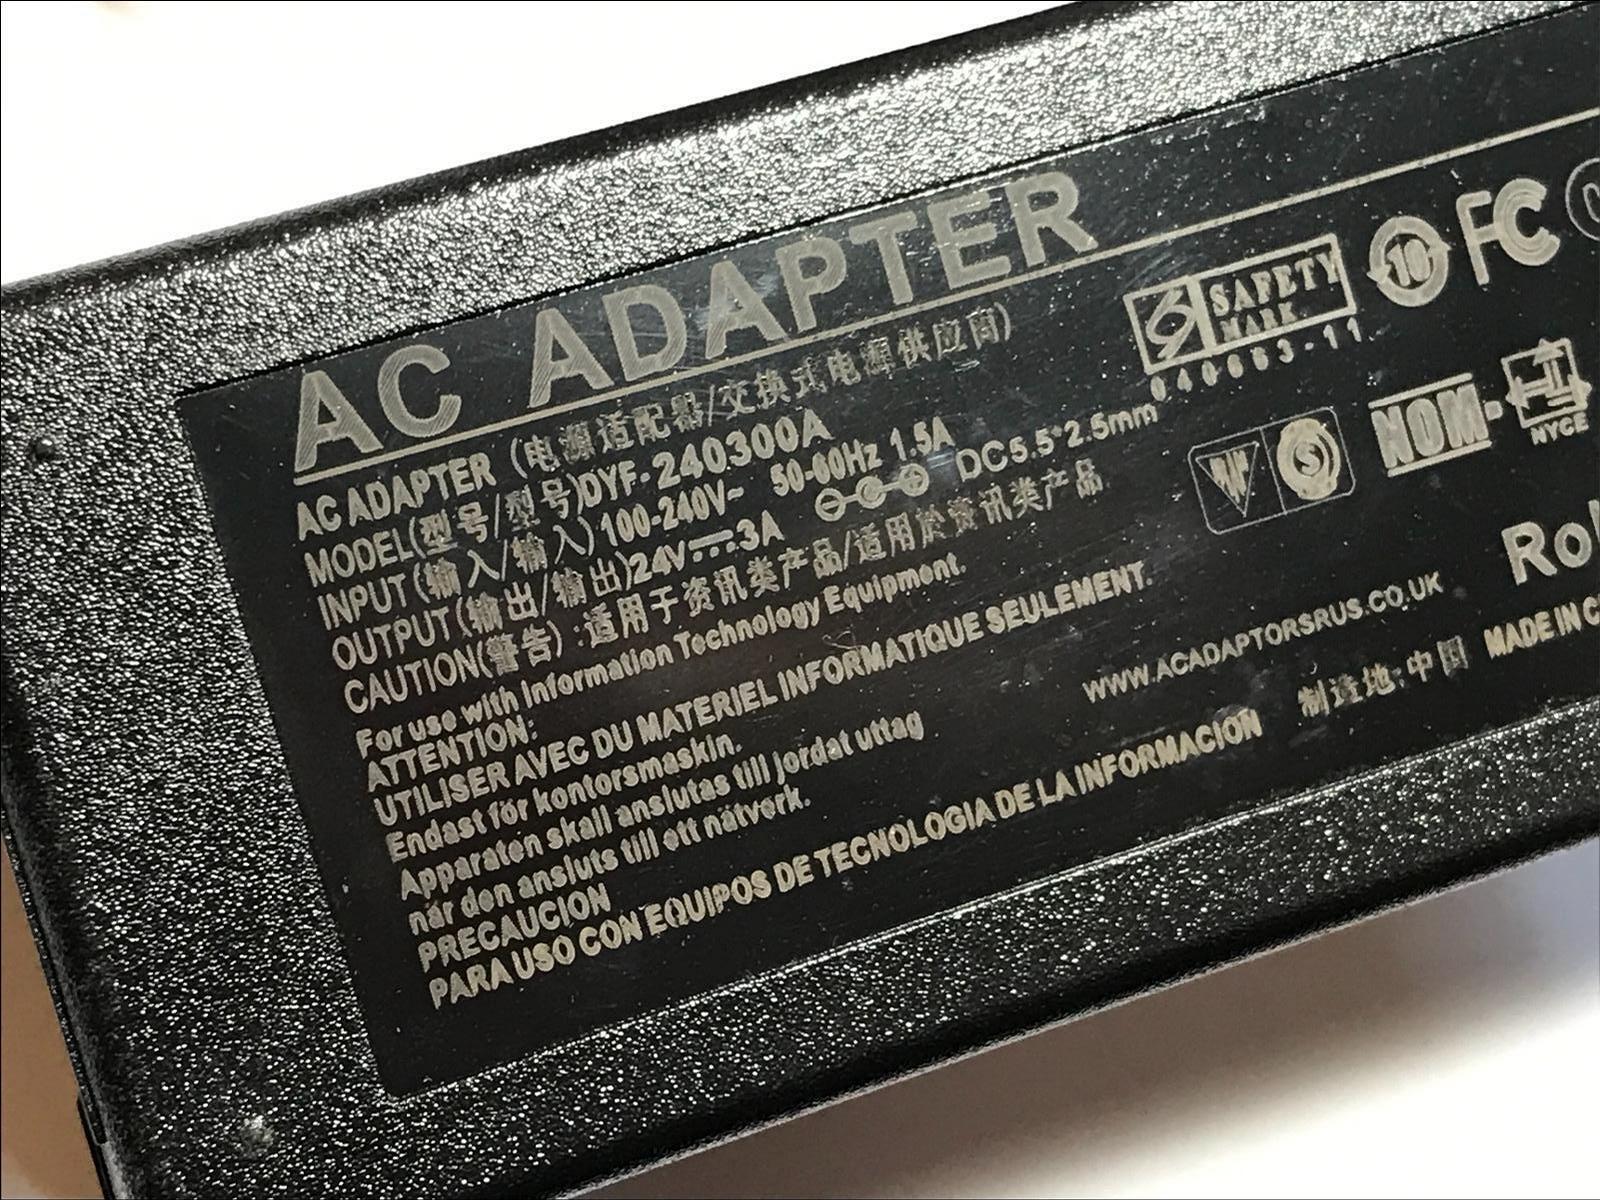 Replacement for 24V 2.5A AC Adapter model CYSE65-240250 4 Pin Power Supply PSU Voltage 24V Output Current 3A Bundl